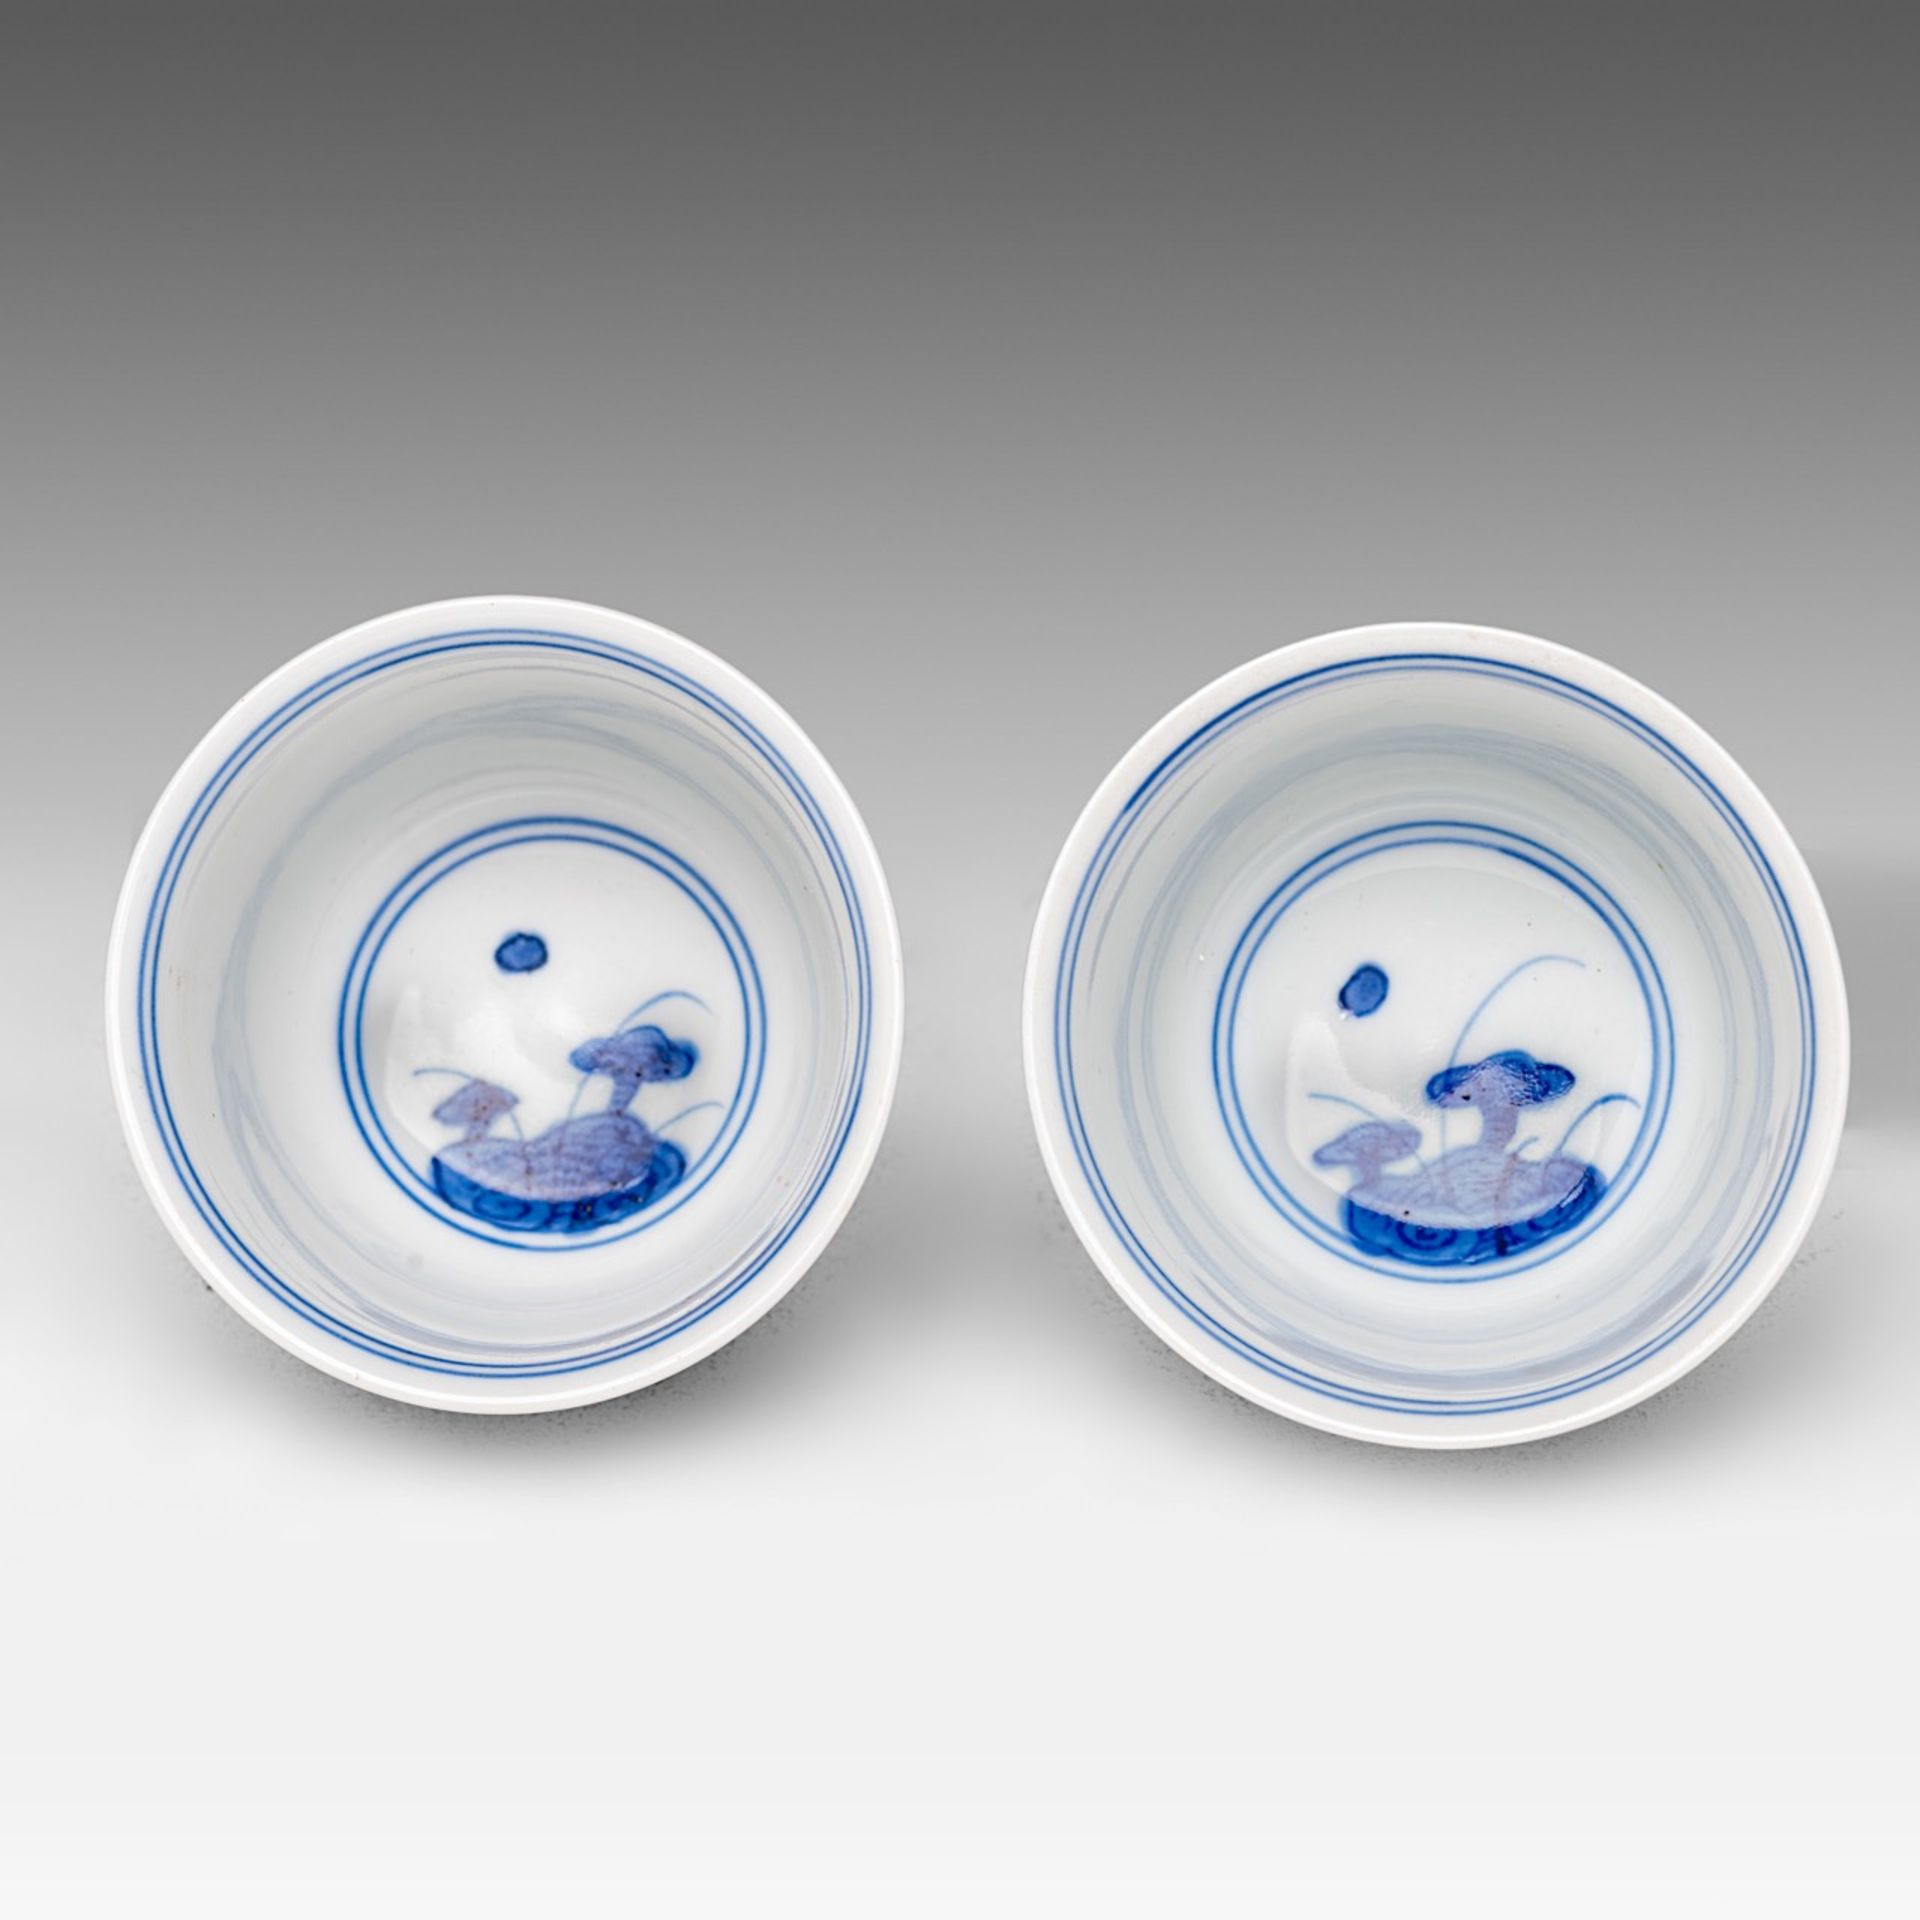 Two Chinese Kangxi style blue and white 'Figural' tea cups, H 6 - dia 8,2 cm - Image 5 of 6